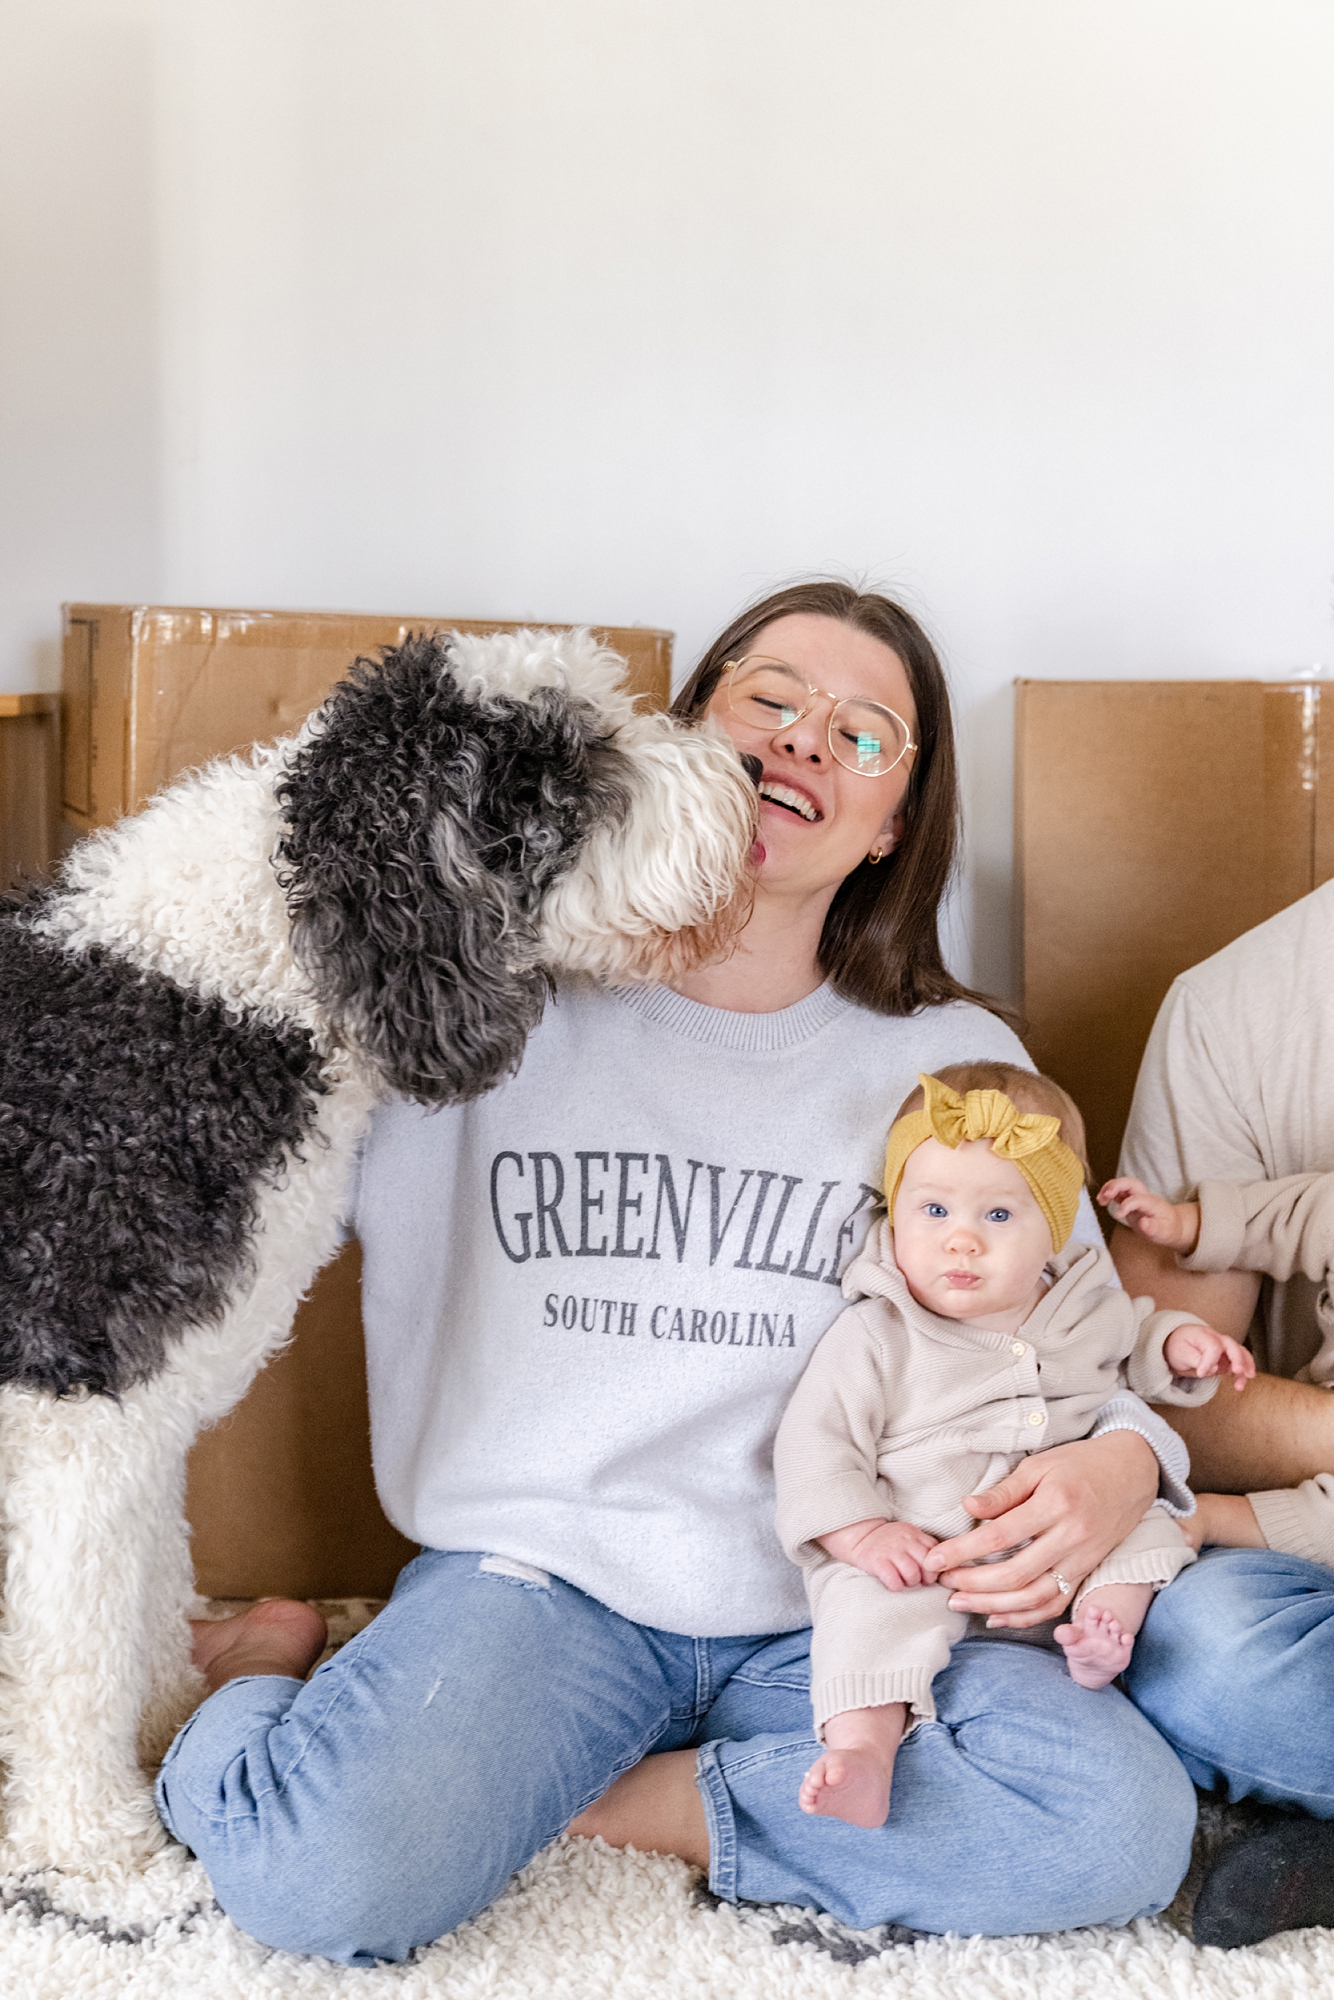 business owner Stephanie Kase shares about her family's move to Greenville, SC